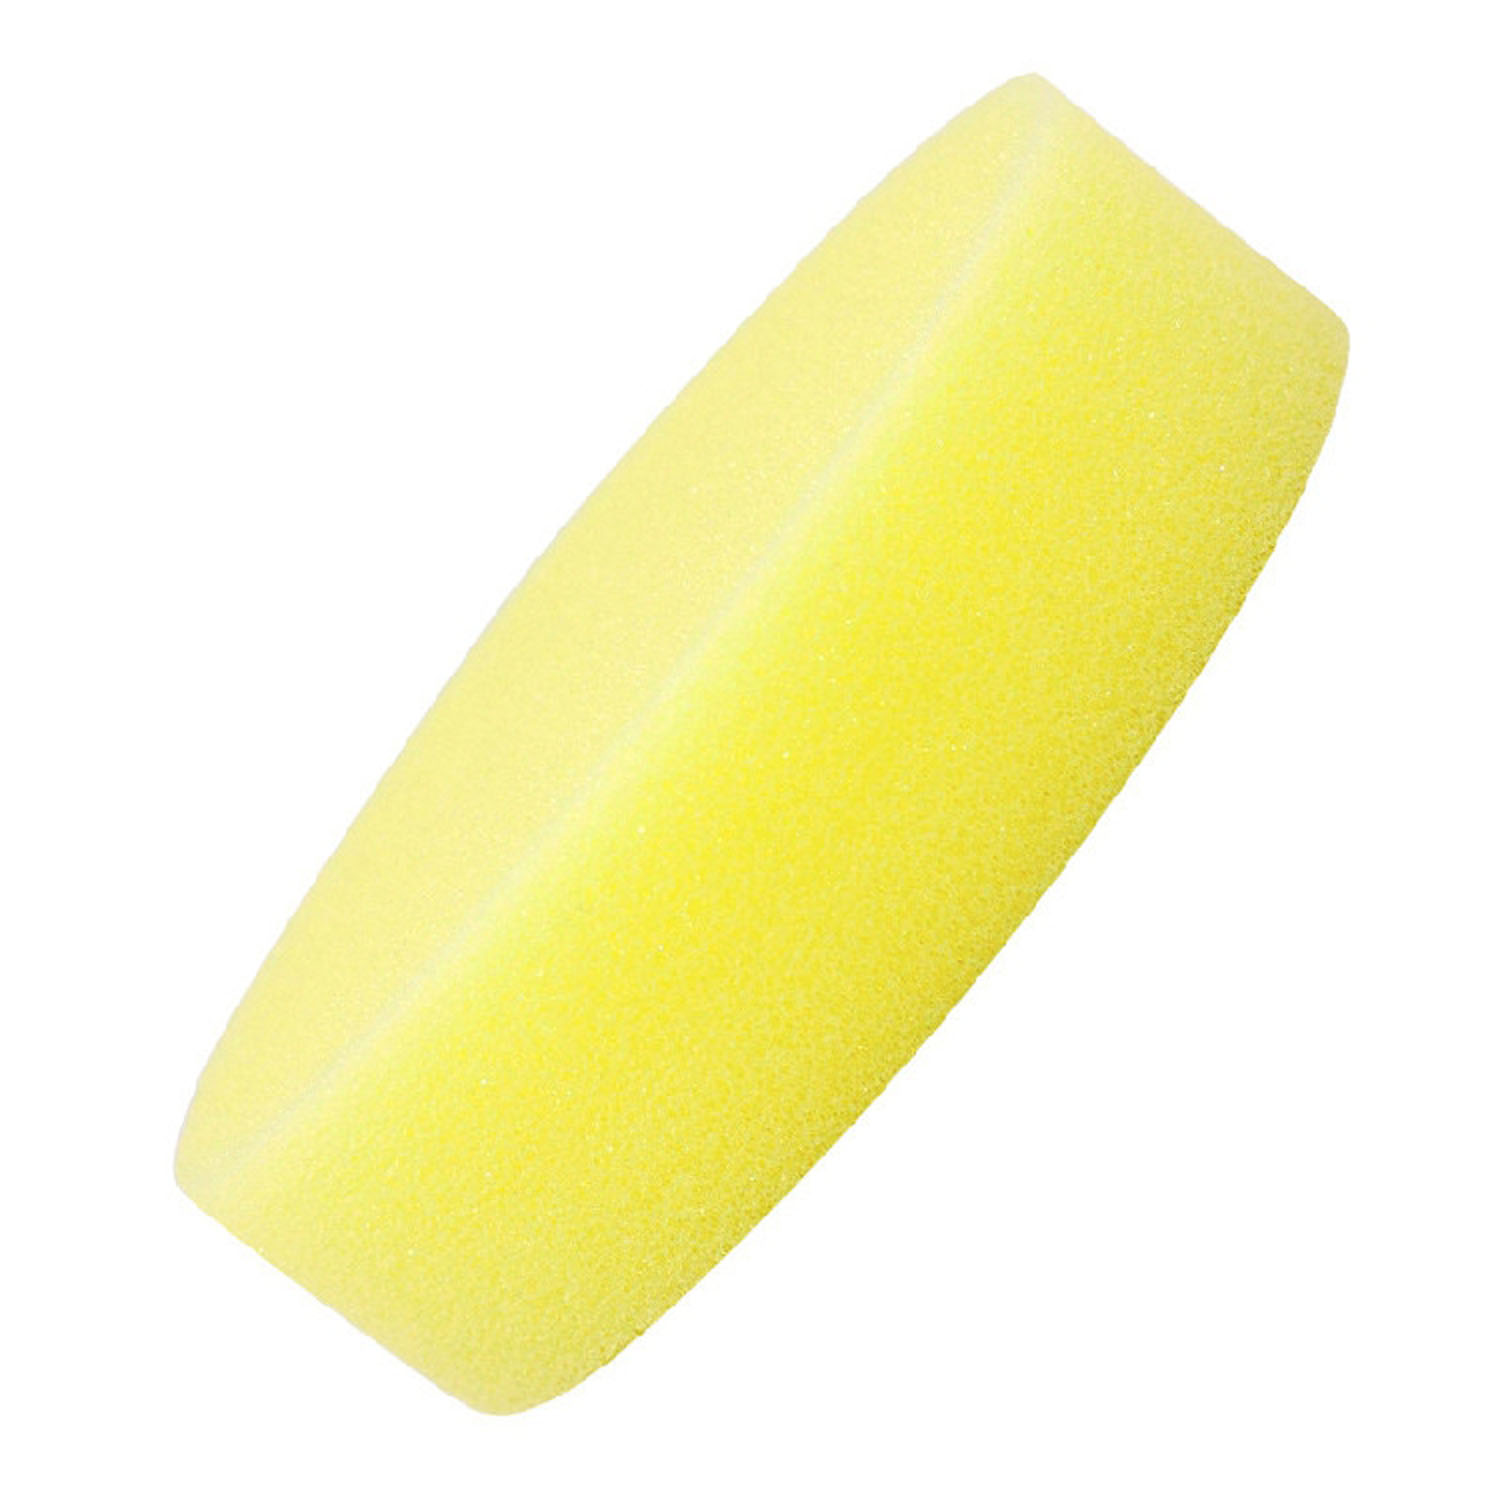 Free Leather Cleaning Sponge